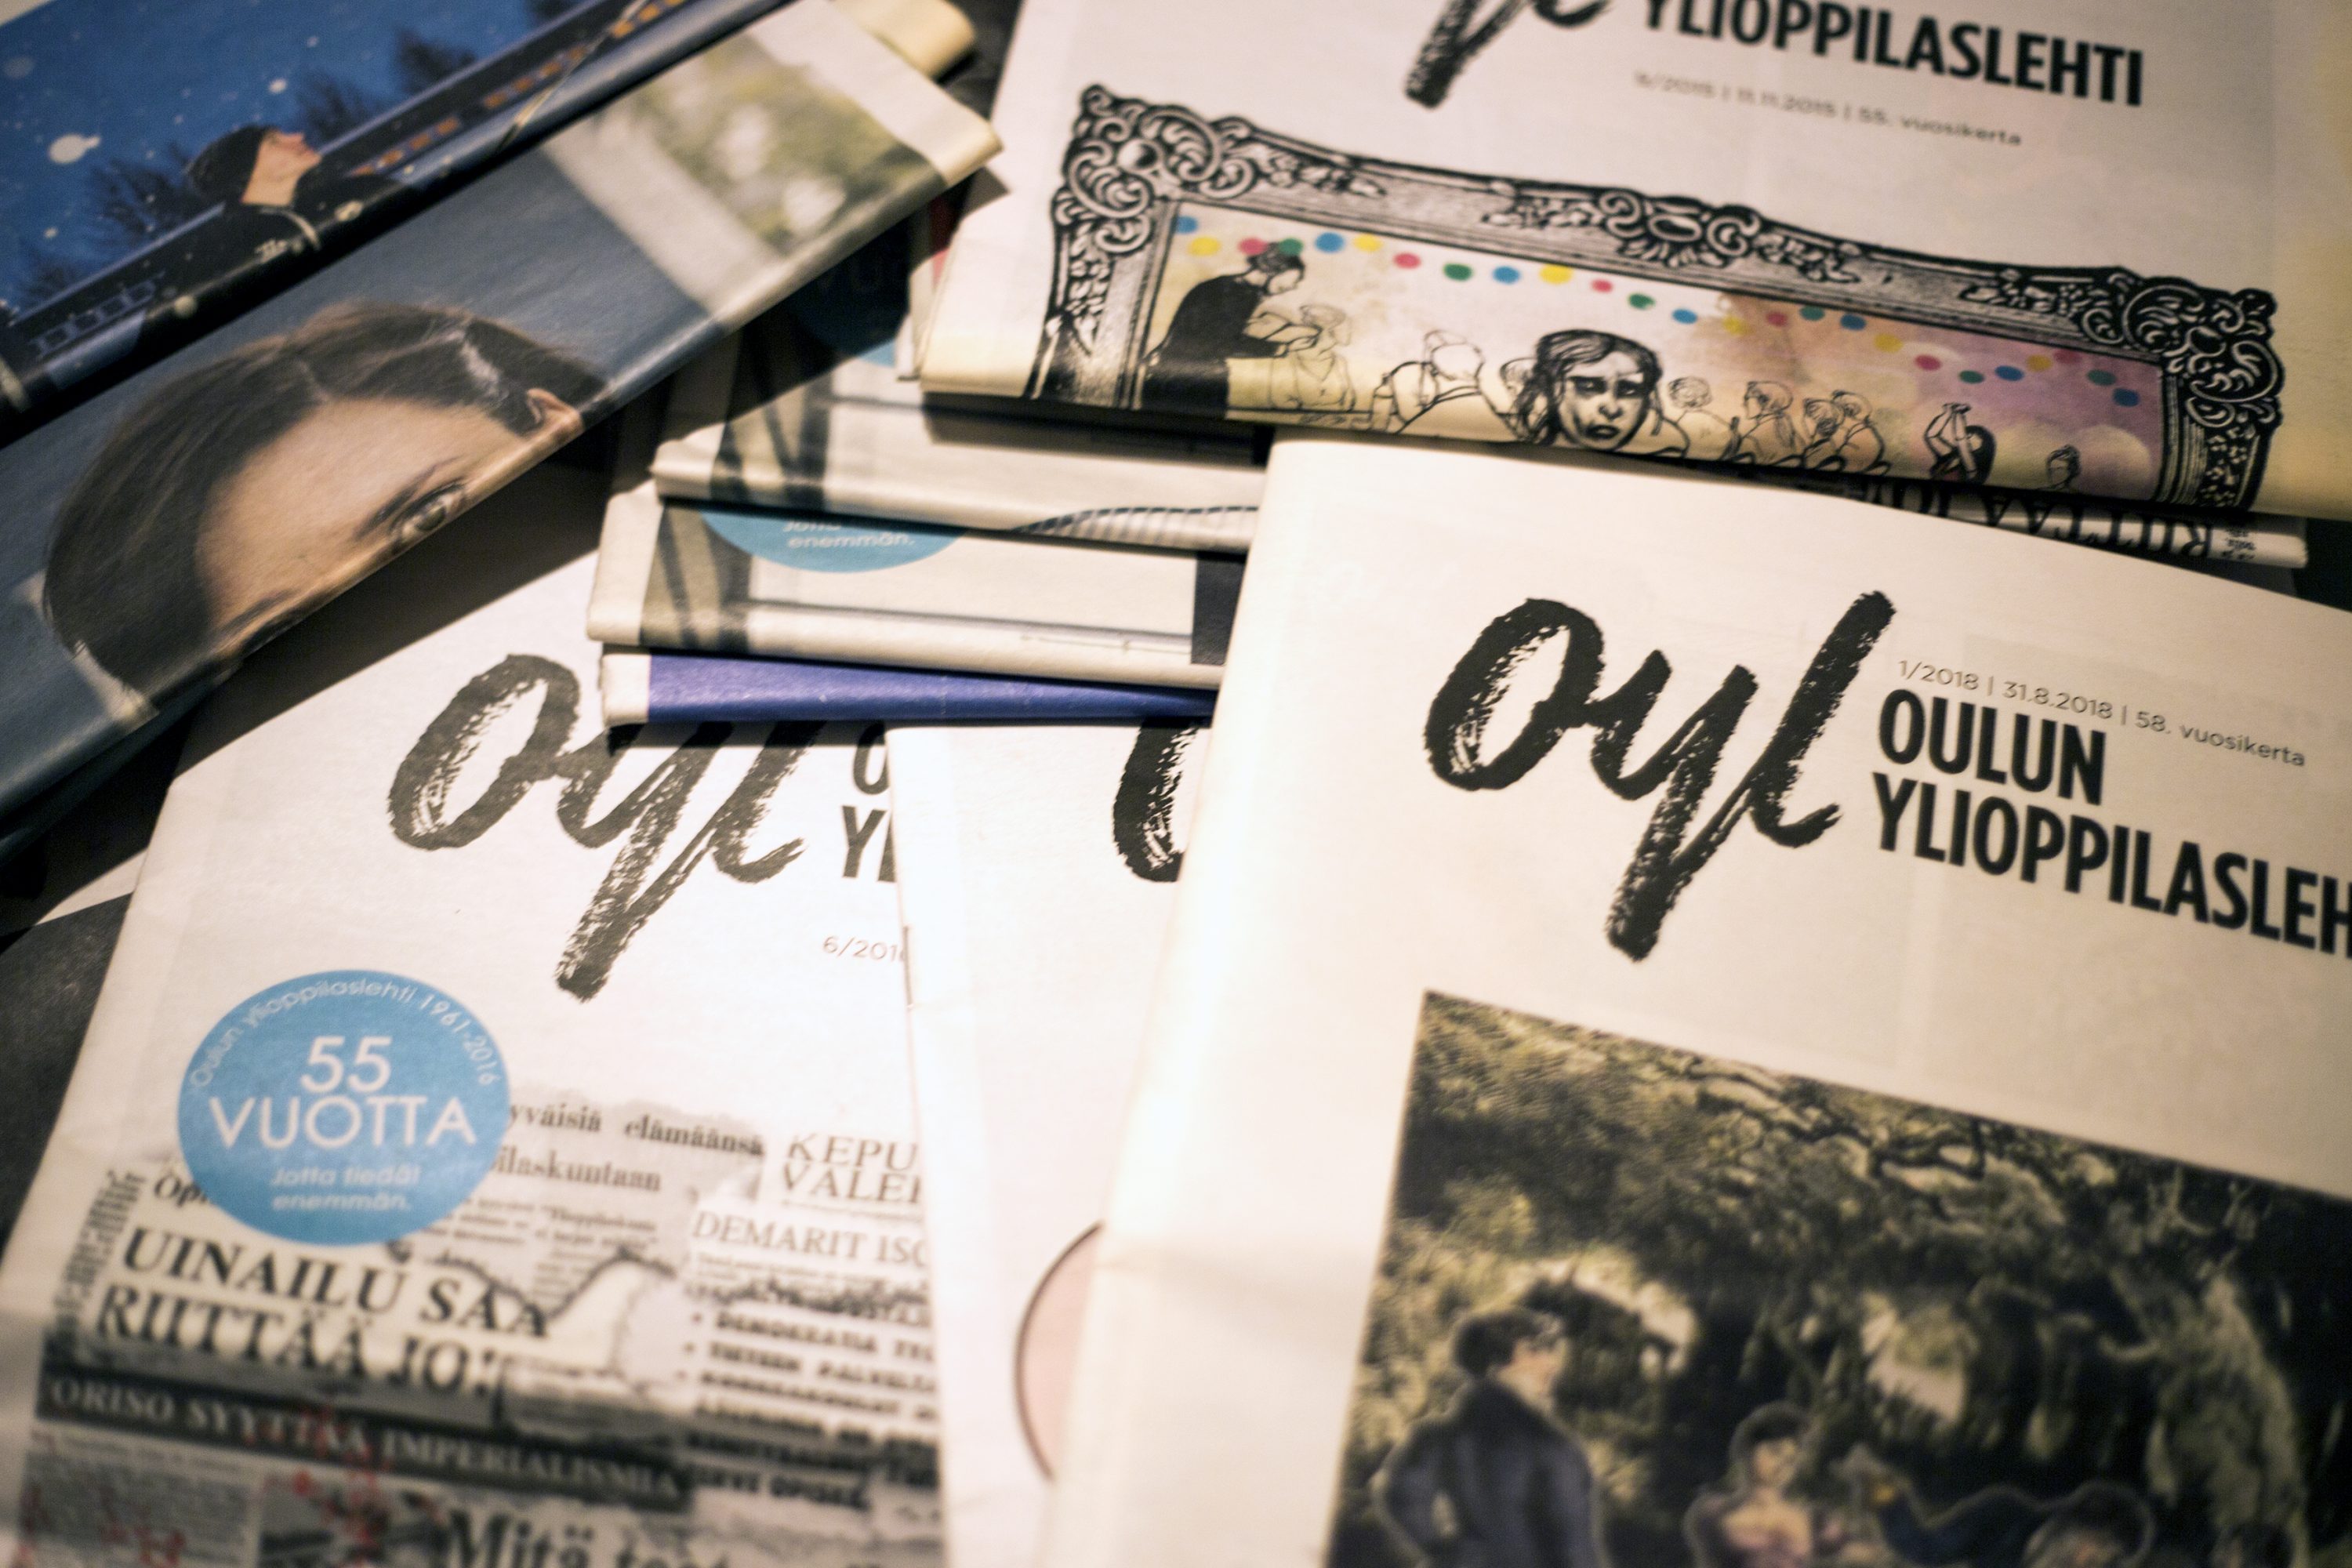 The Oulu Student Magazine's regular print edition was published until the end of 2016. The first issue was published in 1961.